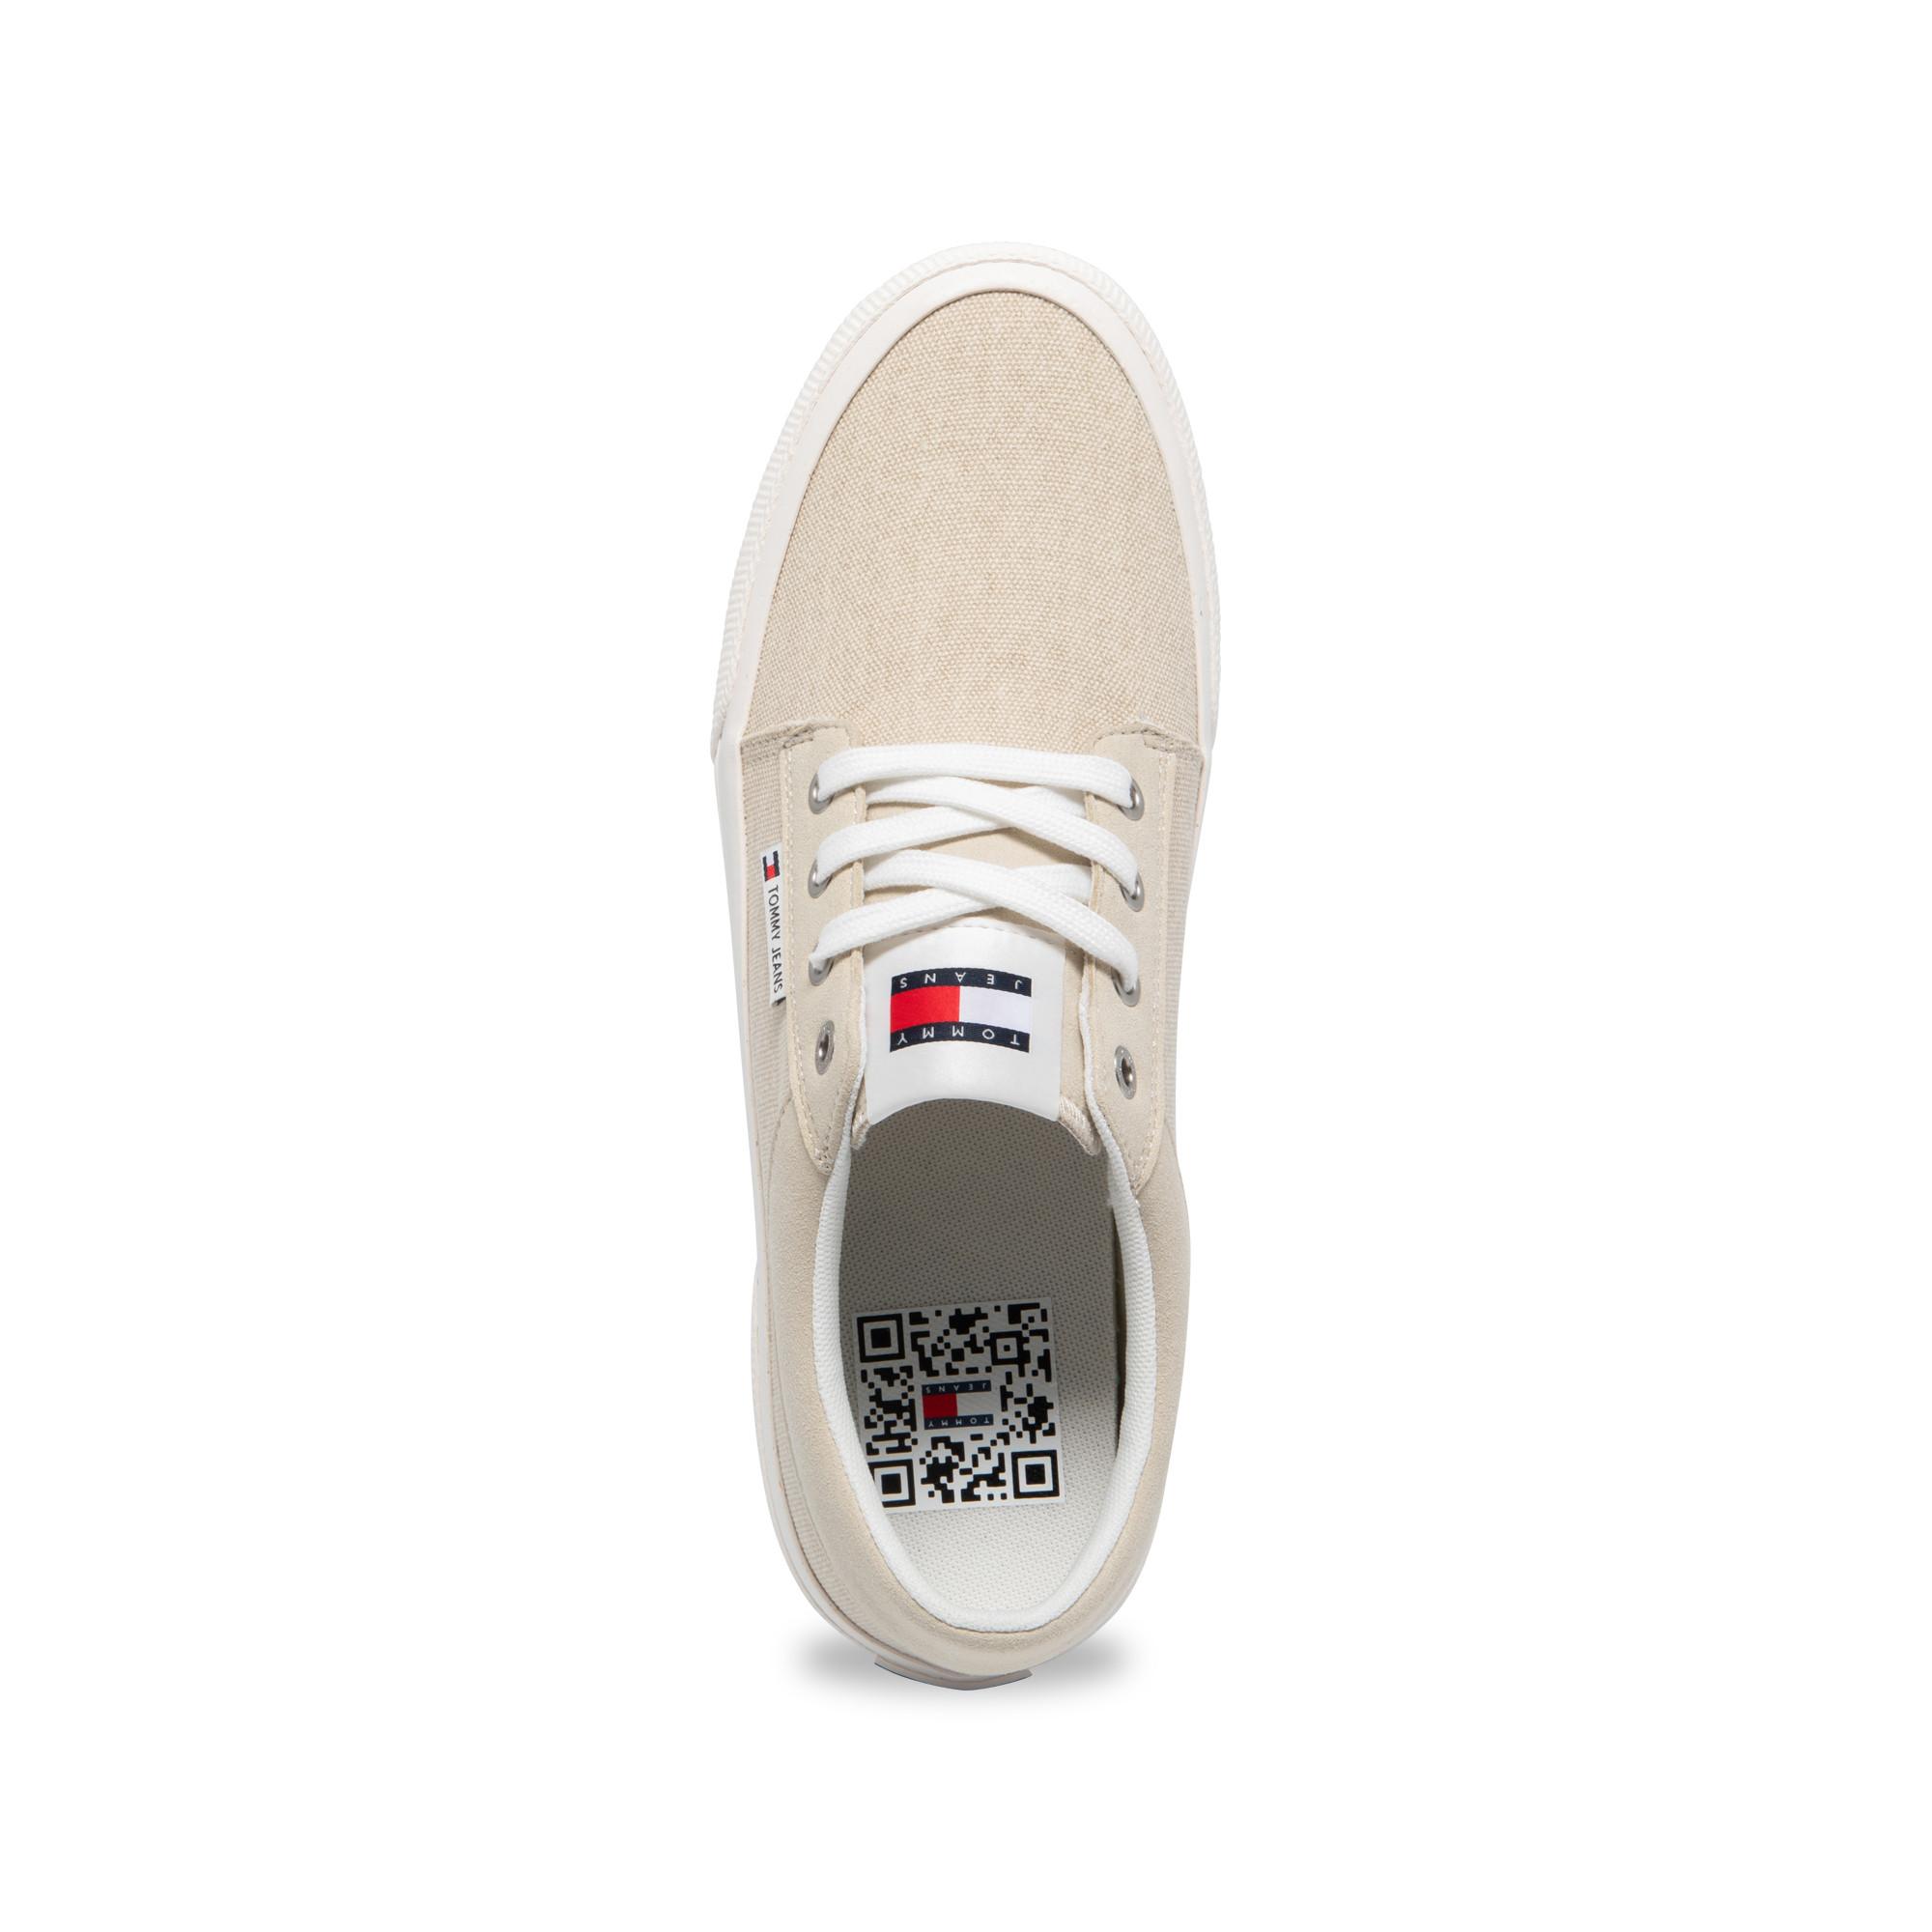 TOMMY JEANS TJM VULC. SKATE DERBY MIX Sneakers, Low Top 